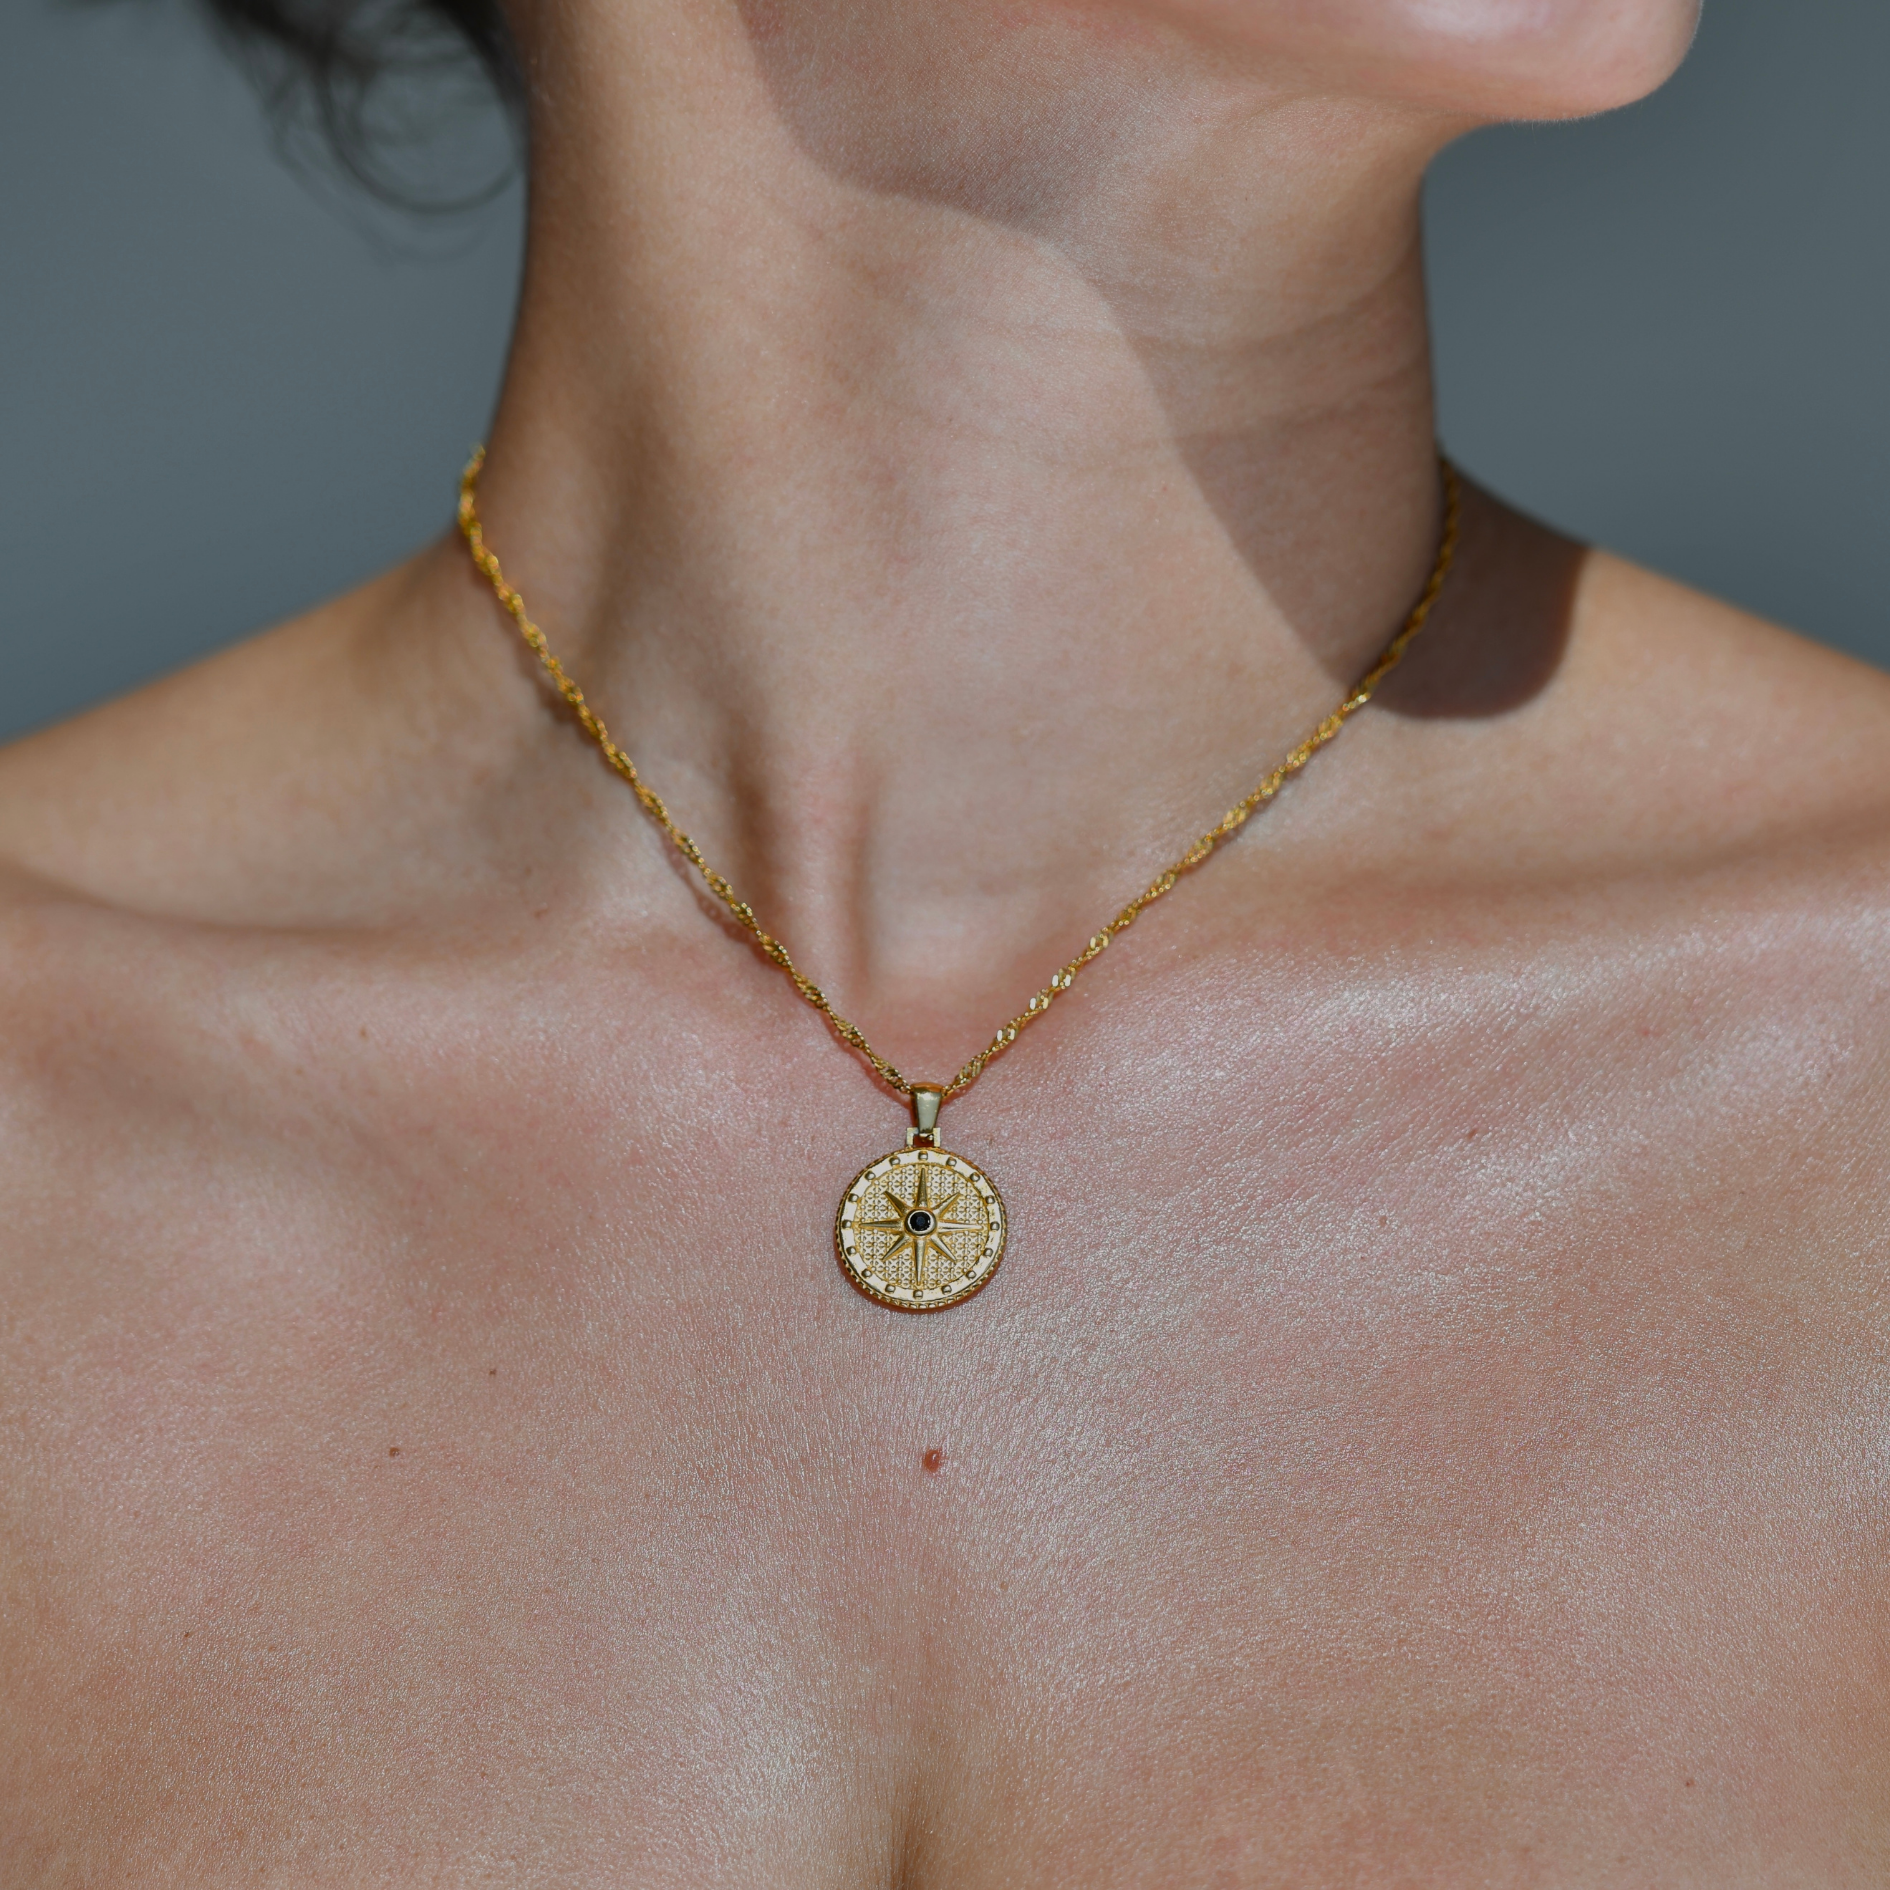 Circle Round waterproof pendant. Compass gold pendnat. Gold chain. The pandant is droped on the chain. A black zircon is in the moddle of the pendant. Compass Pendant Gold Necklace.